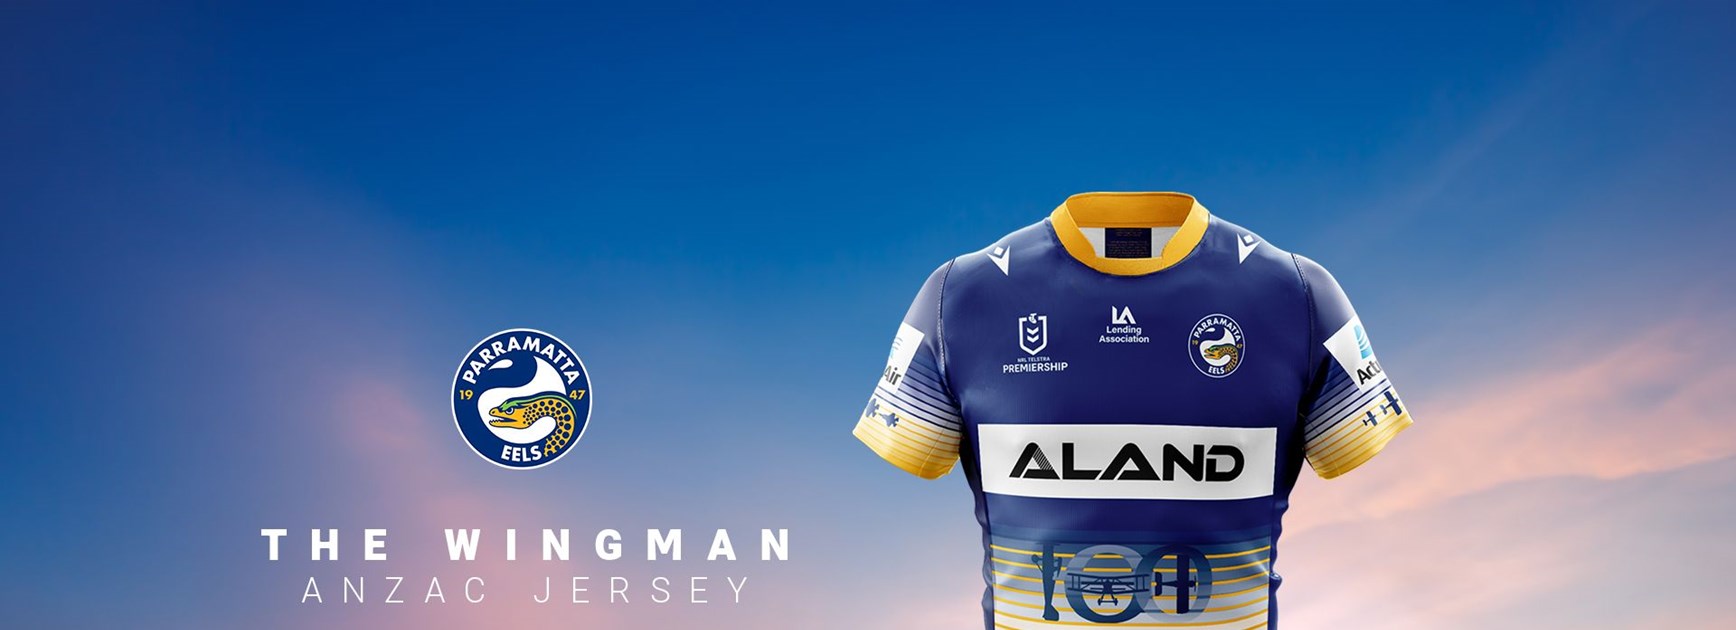 Eels' 2021 Anzac jersey unveiled for pre-sale